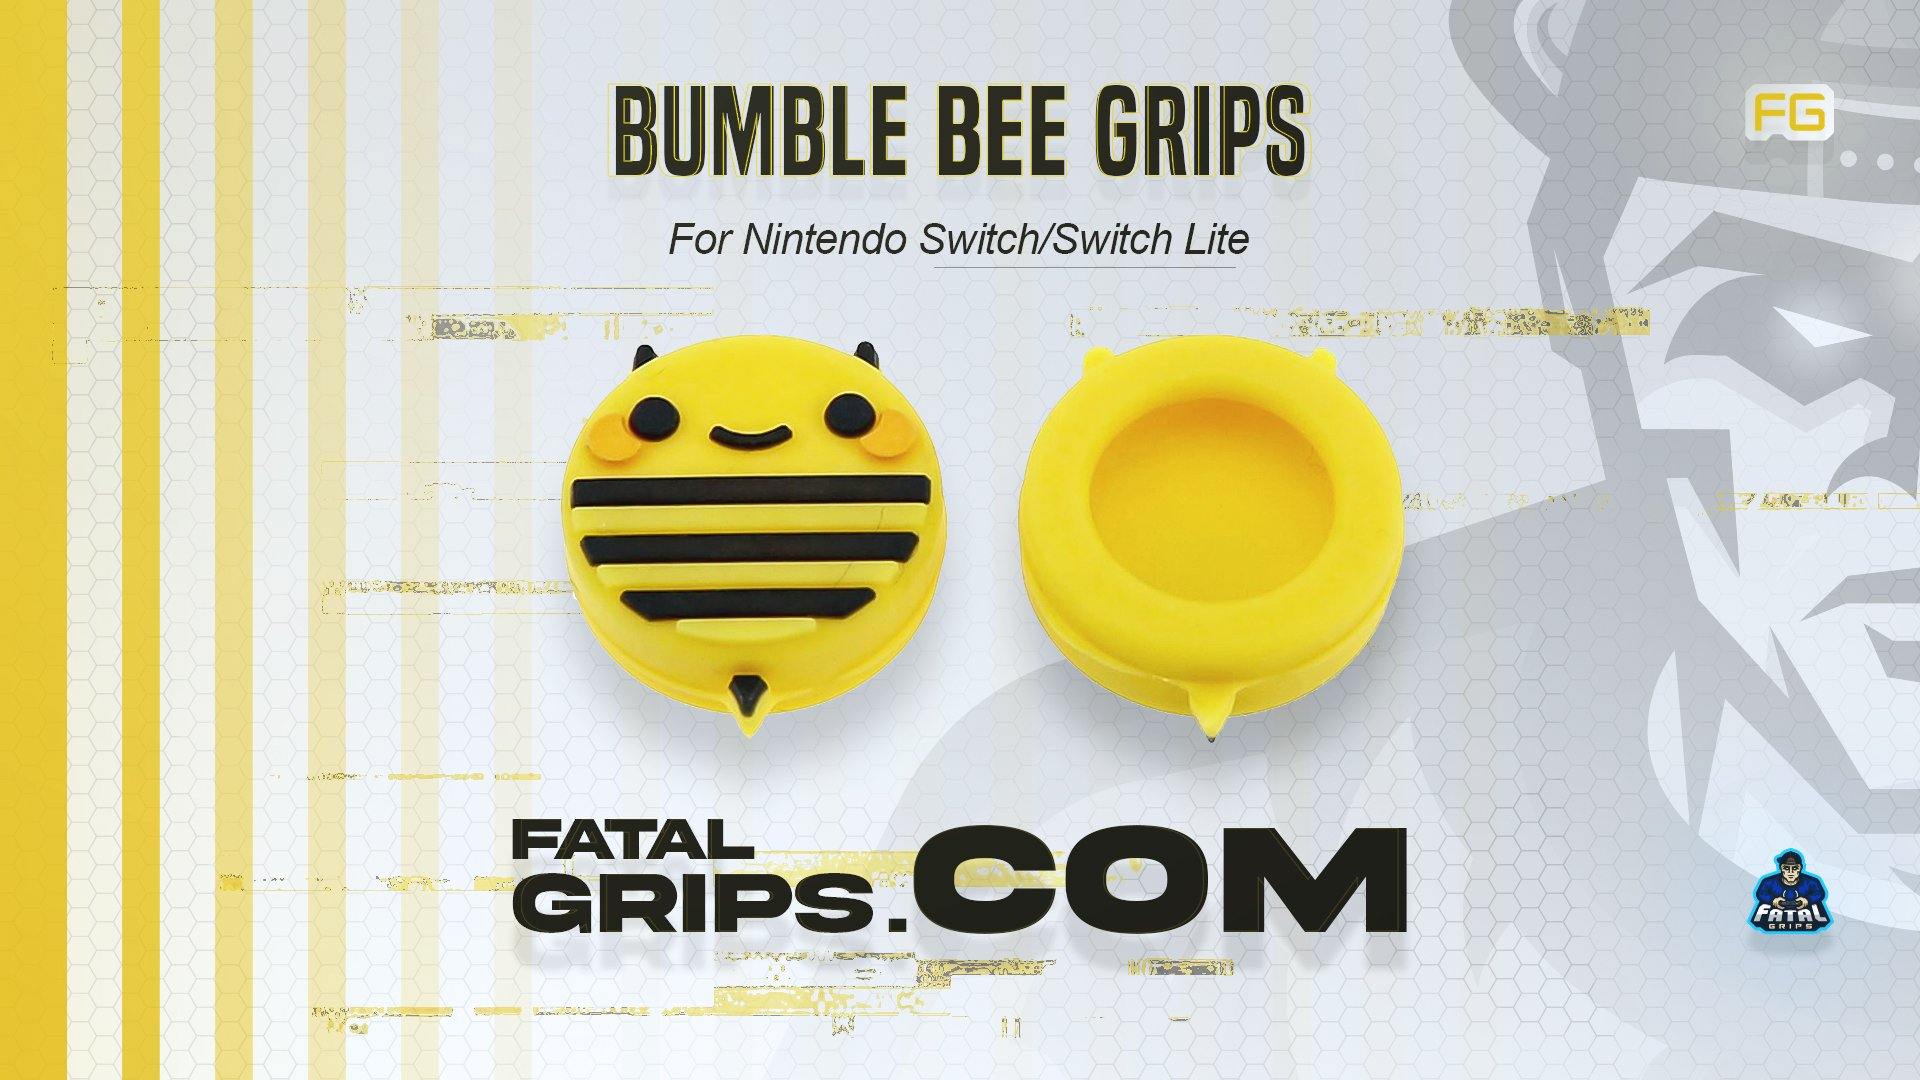 Bumble Bee Grips - Fatal Grips